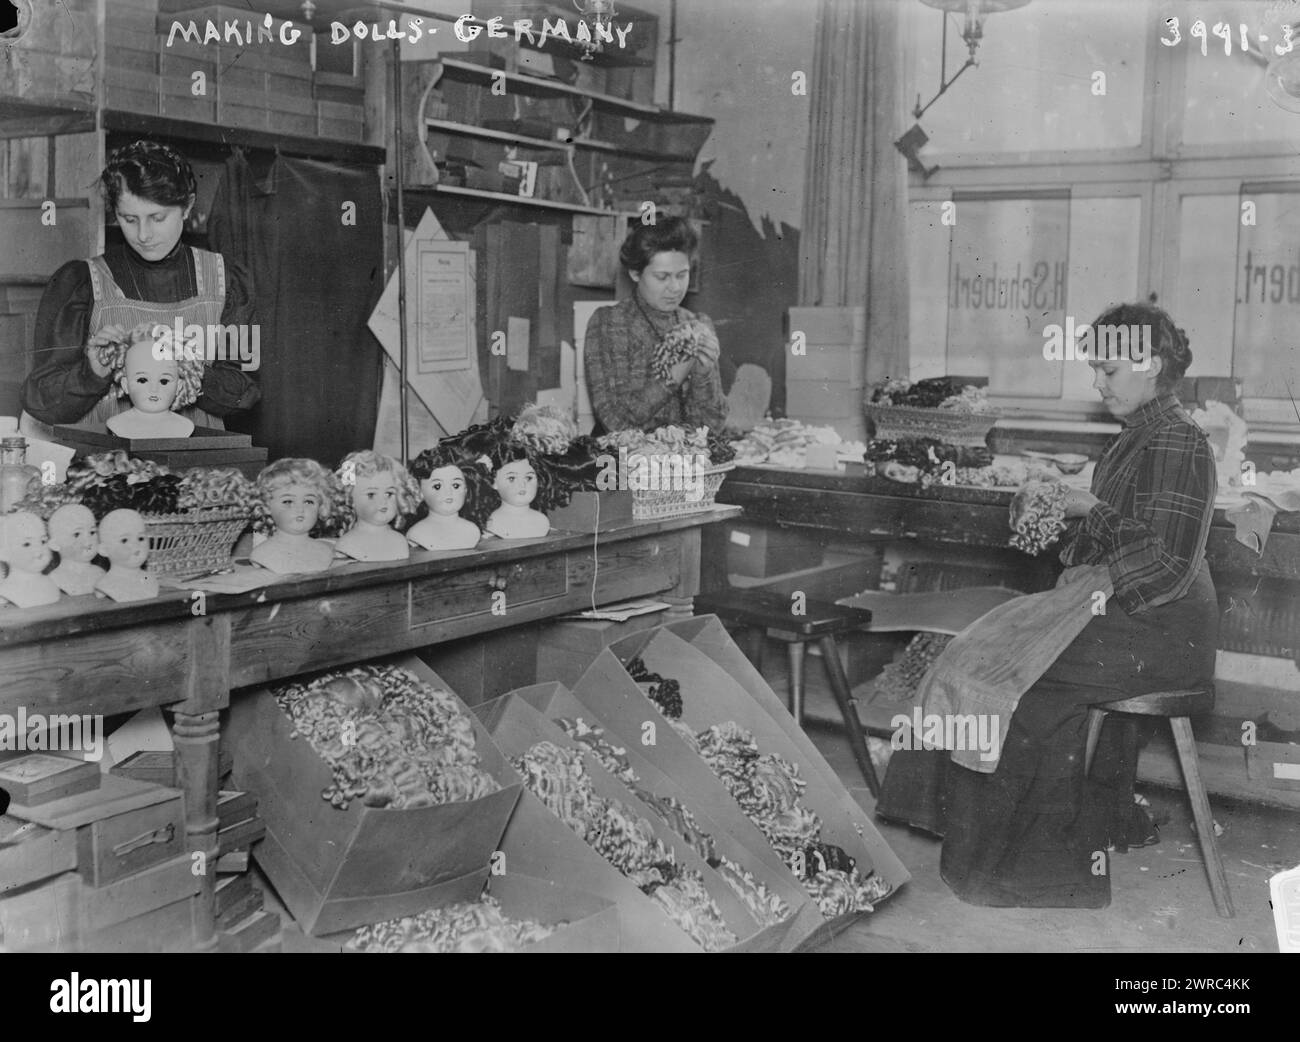 Making dolls, Germany, Photograph shows German toymakers whose work was impacted by the British blockage of German products in 1916., between ca. 1915 and 1916, Glass negatives, 1 negative: glass Stock Photo